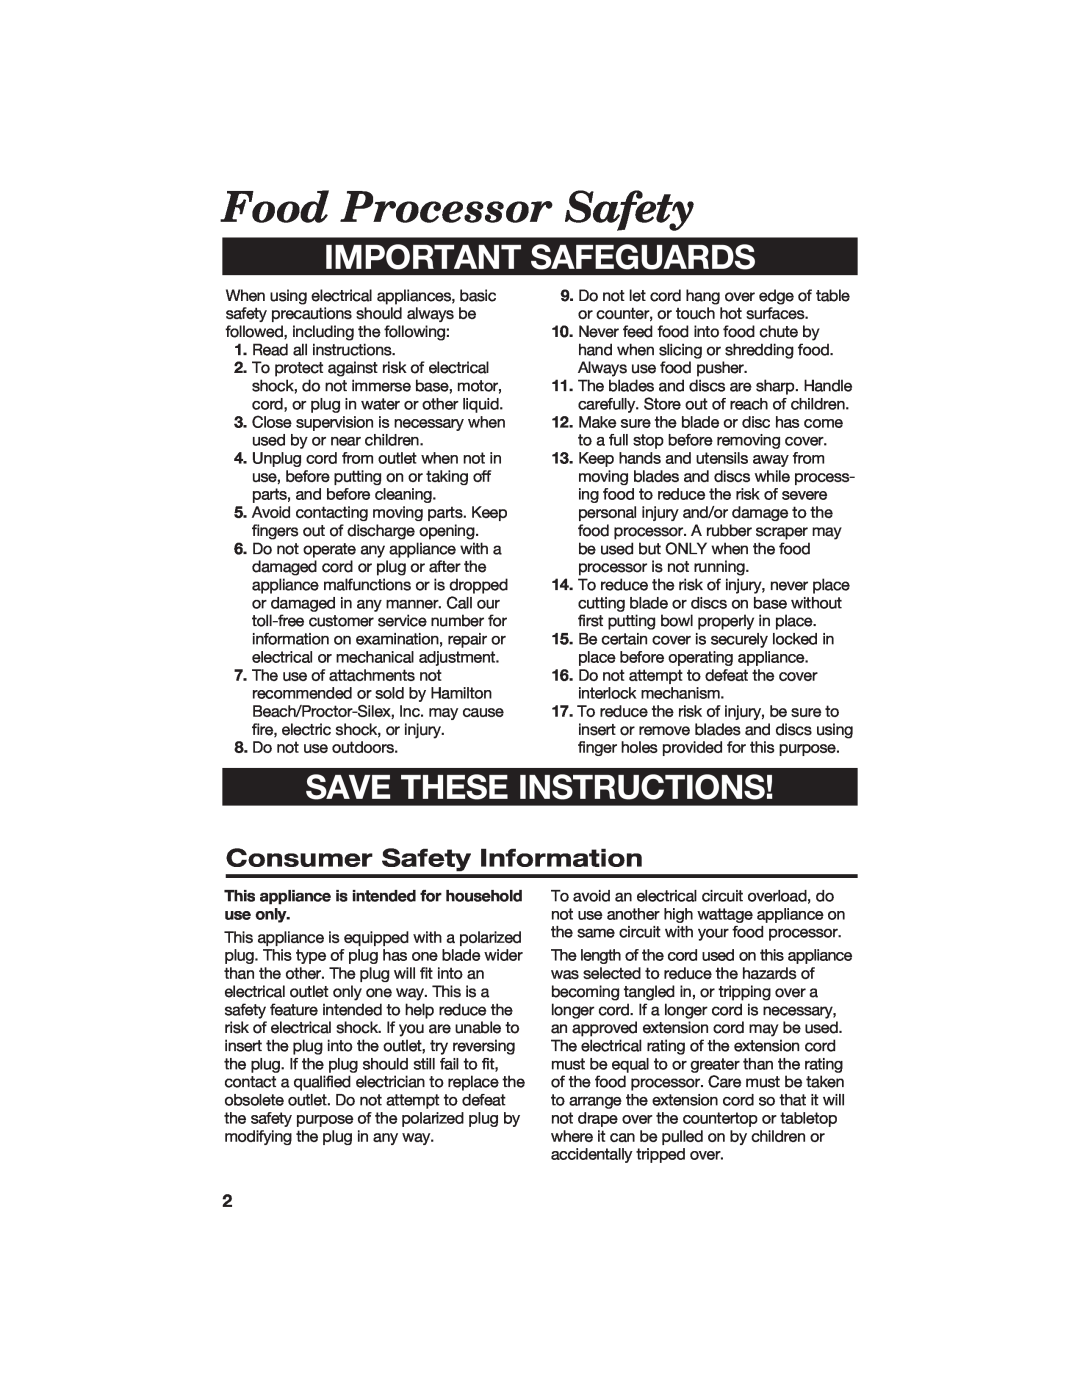 Hamilton Beach 840067400 Food Processor Safety, Consumer Safety Information, Important Safeguards, Save These Instructions 